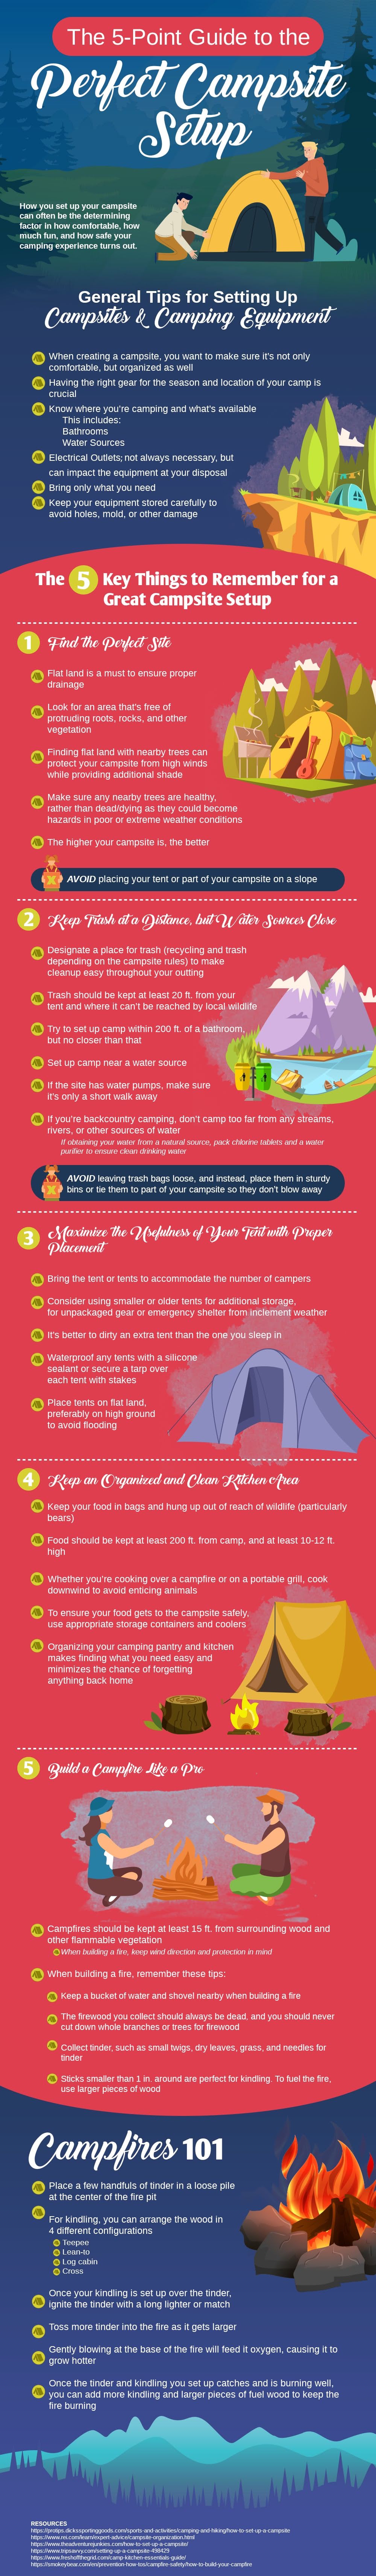 The 5-Point Guide to the Perfect Campsite Setup #infographic